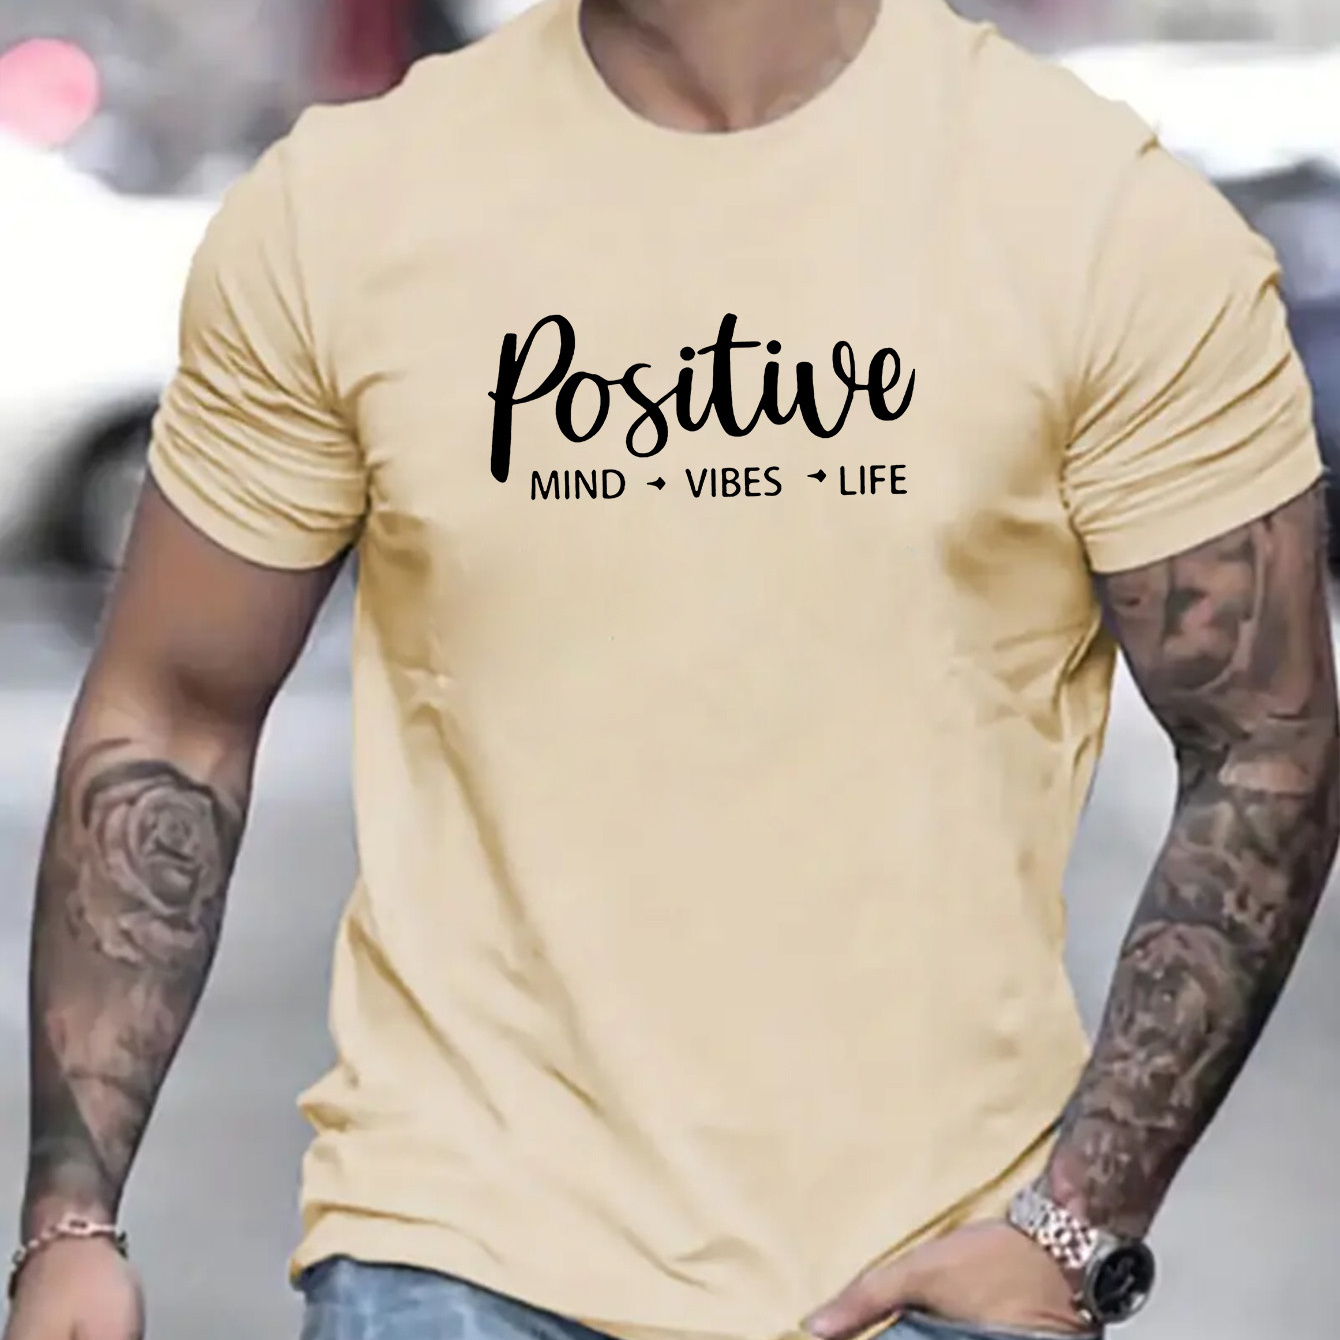 

Positive Mind Print, Men's Round Crew Neck Short Sleeve, Simple Style Tee Fashion Regular Fit T-shirt, Casual Comfy Top For Spring Summer Holiday Leisure Vacation Men's Clothing As Gift